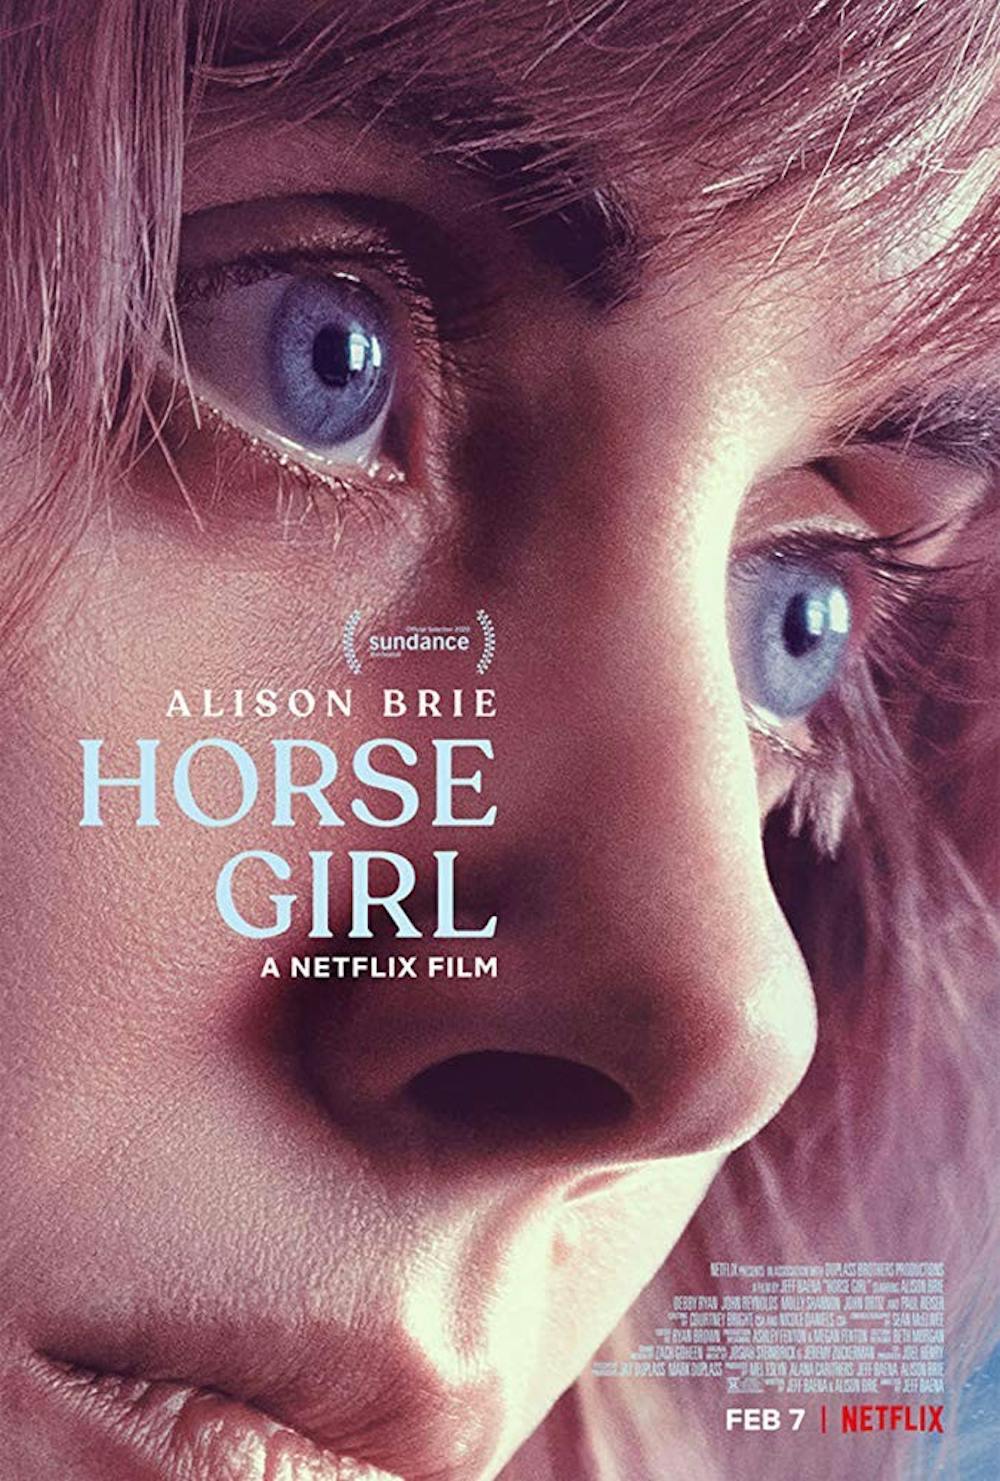 "Horse Girl" is a fast-paced, convoluted thriller which leaves you with more questions than answers